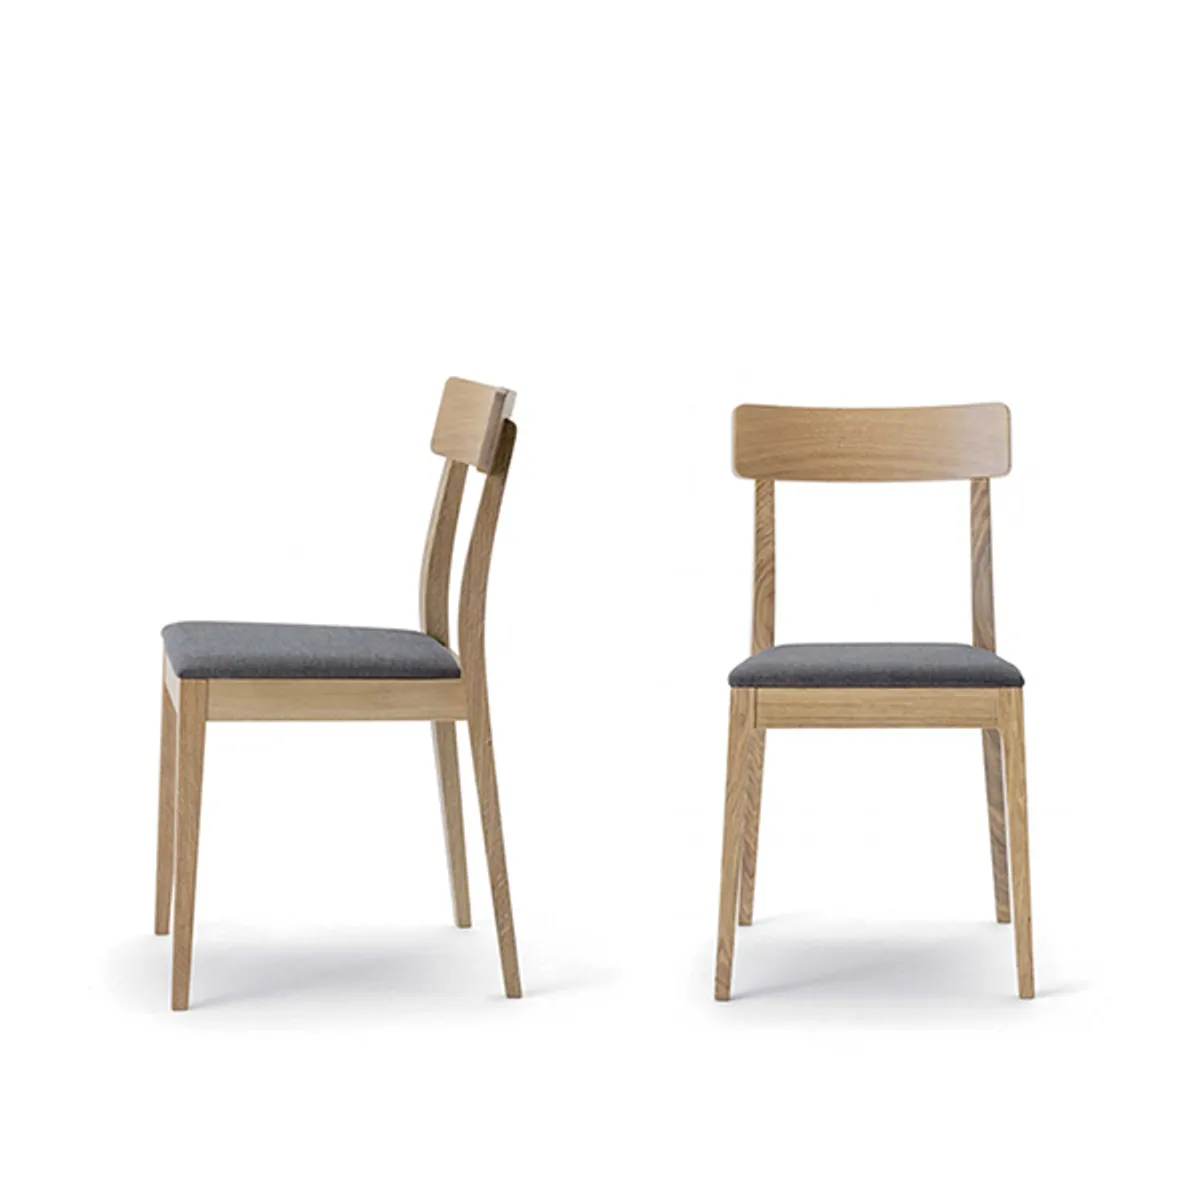 Tupi Side Chair Inside Out Contracts